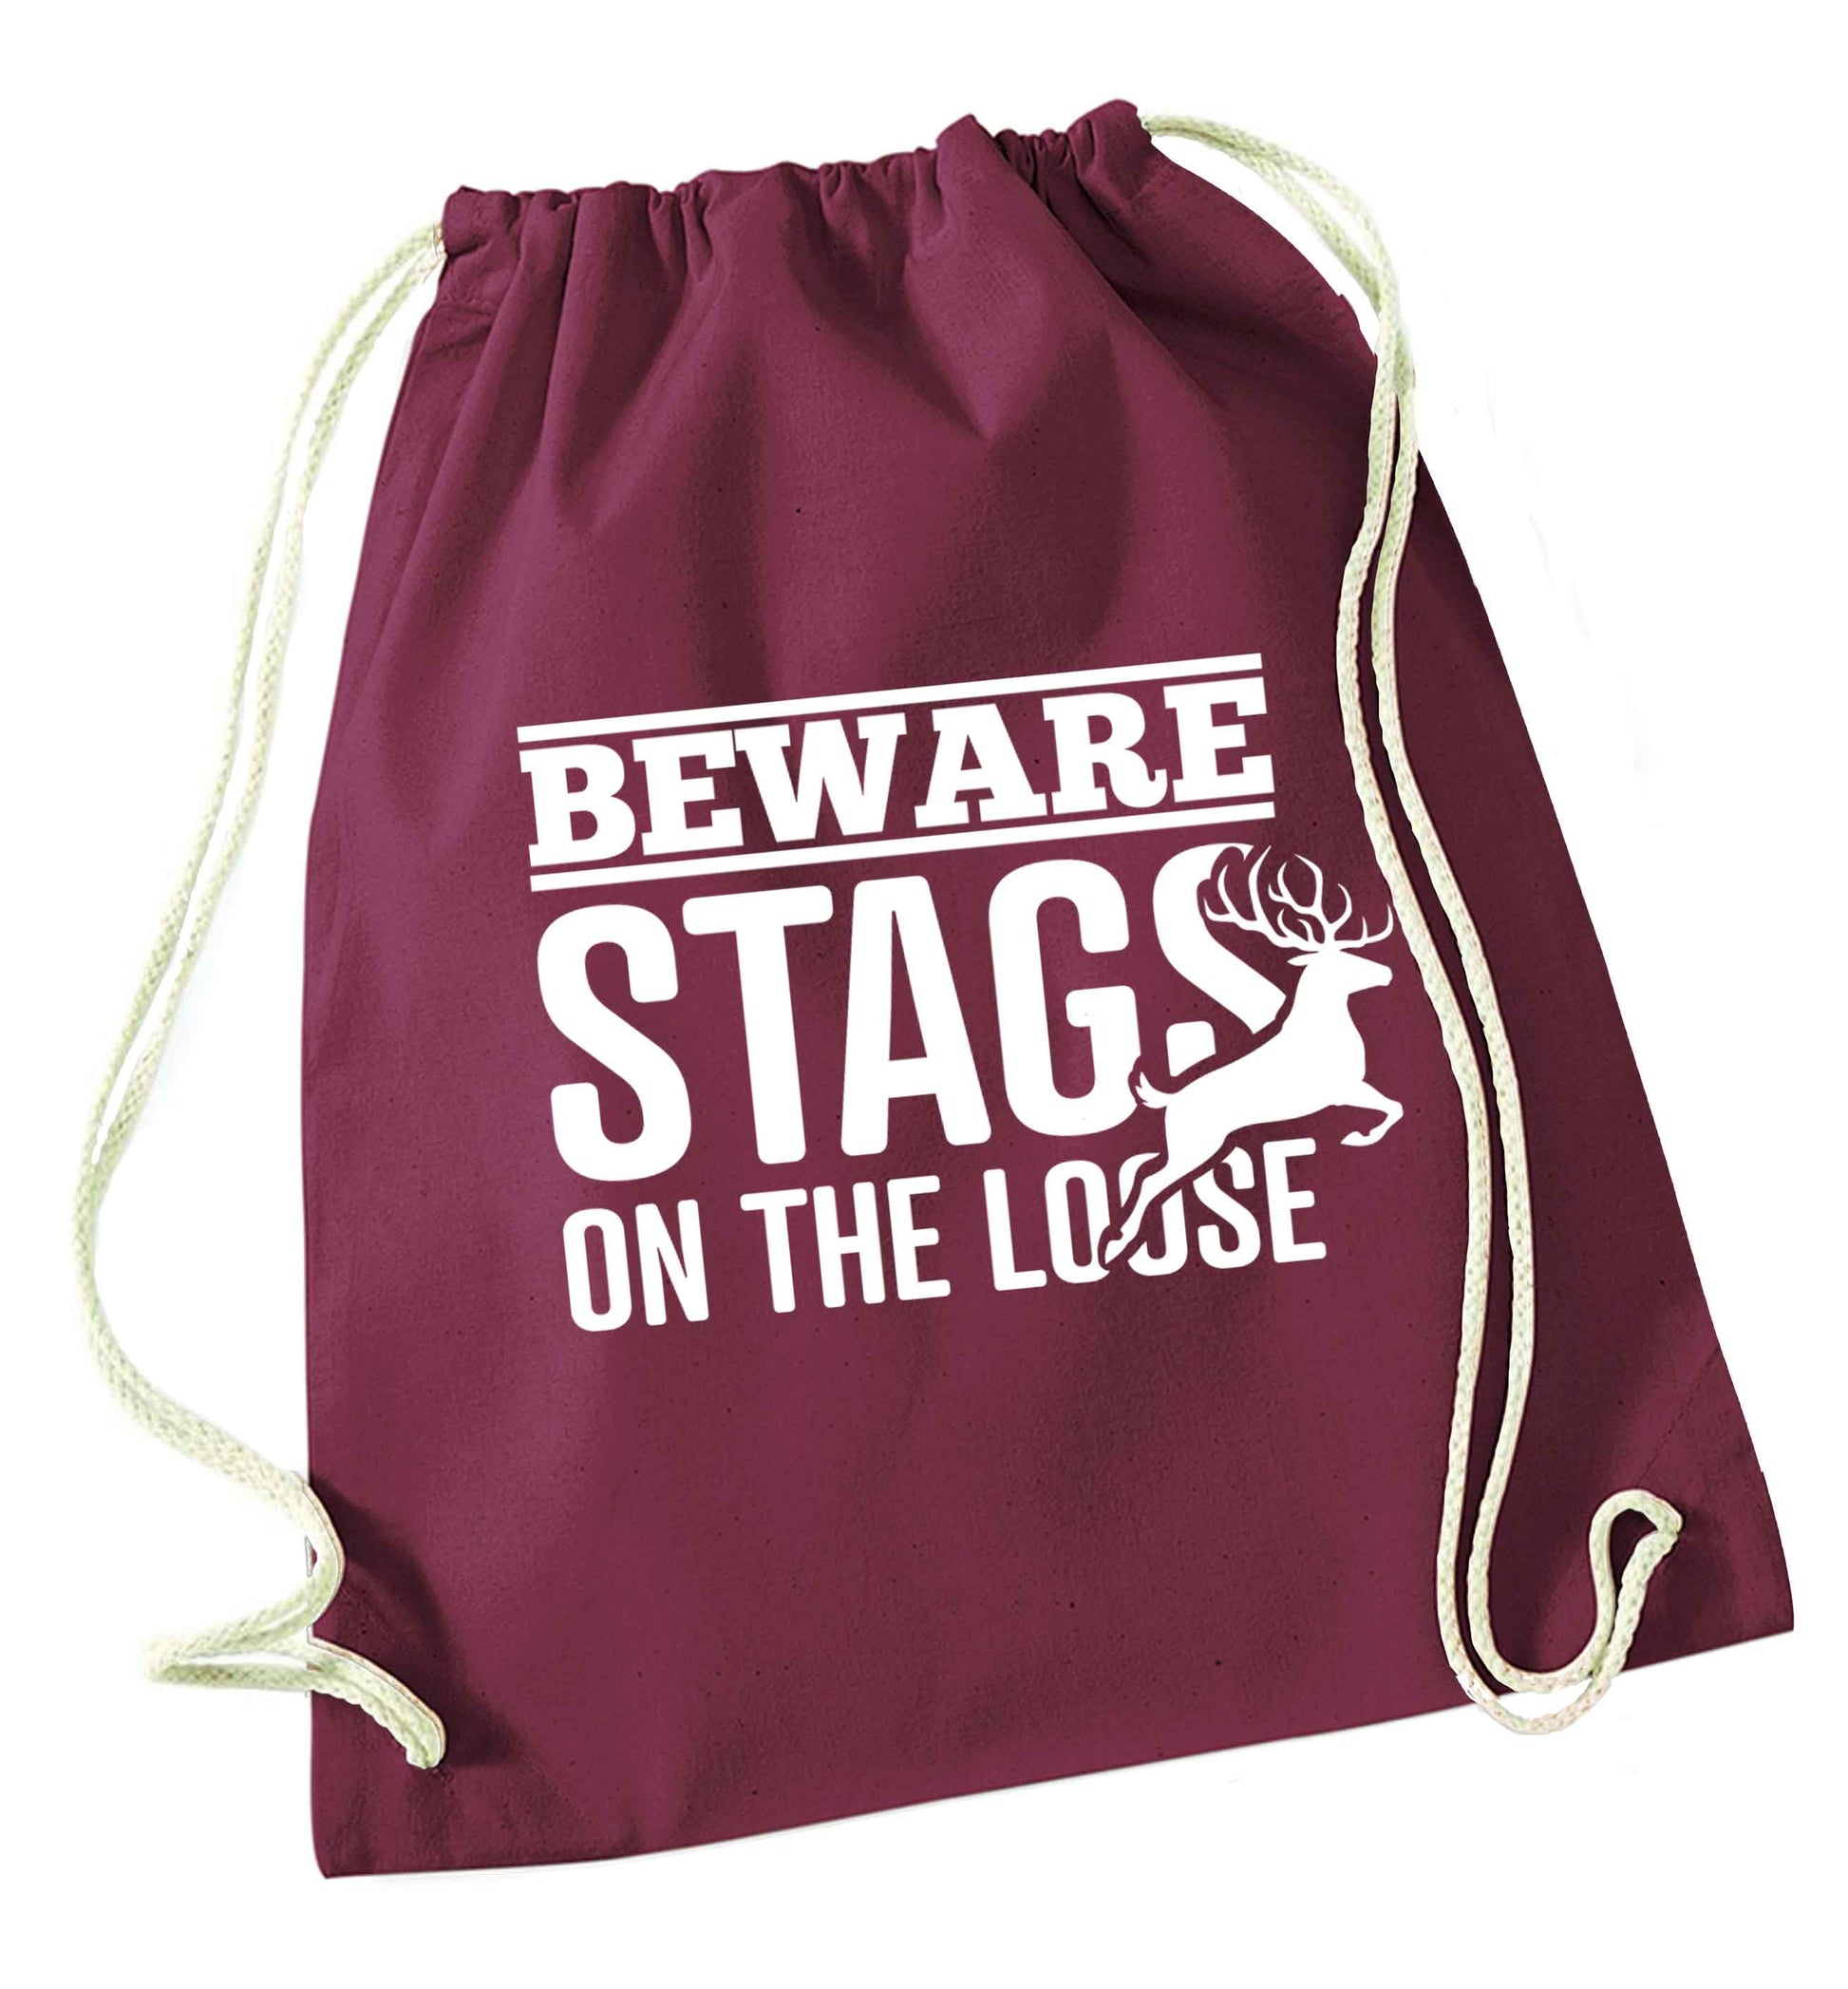 Beware stags on the loose maroon drawstring bag